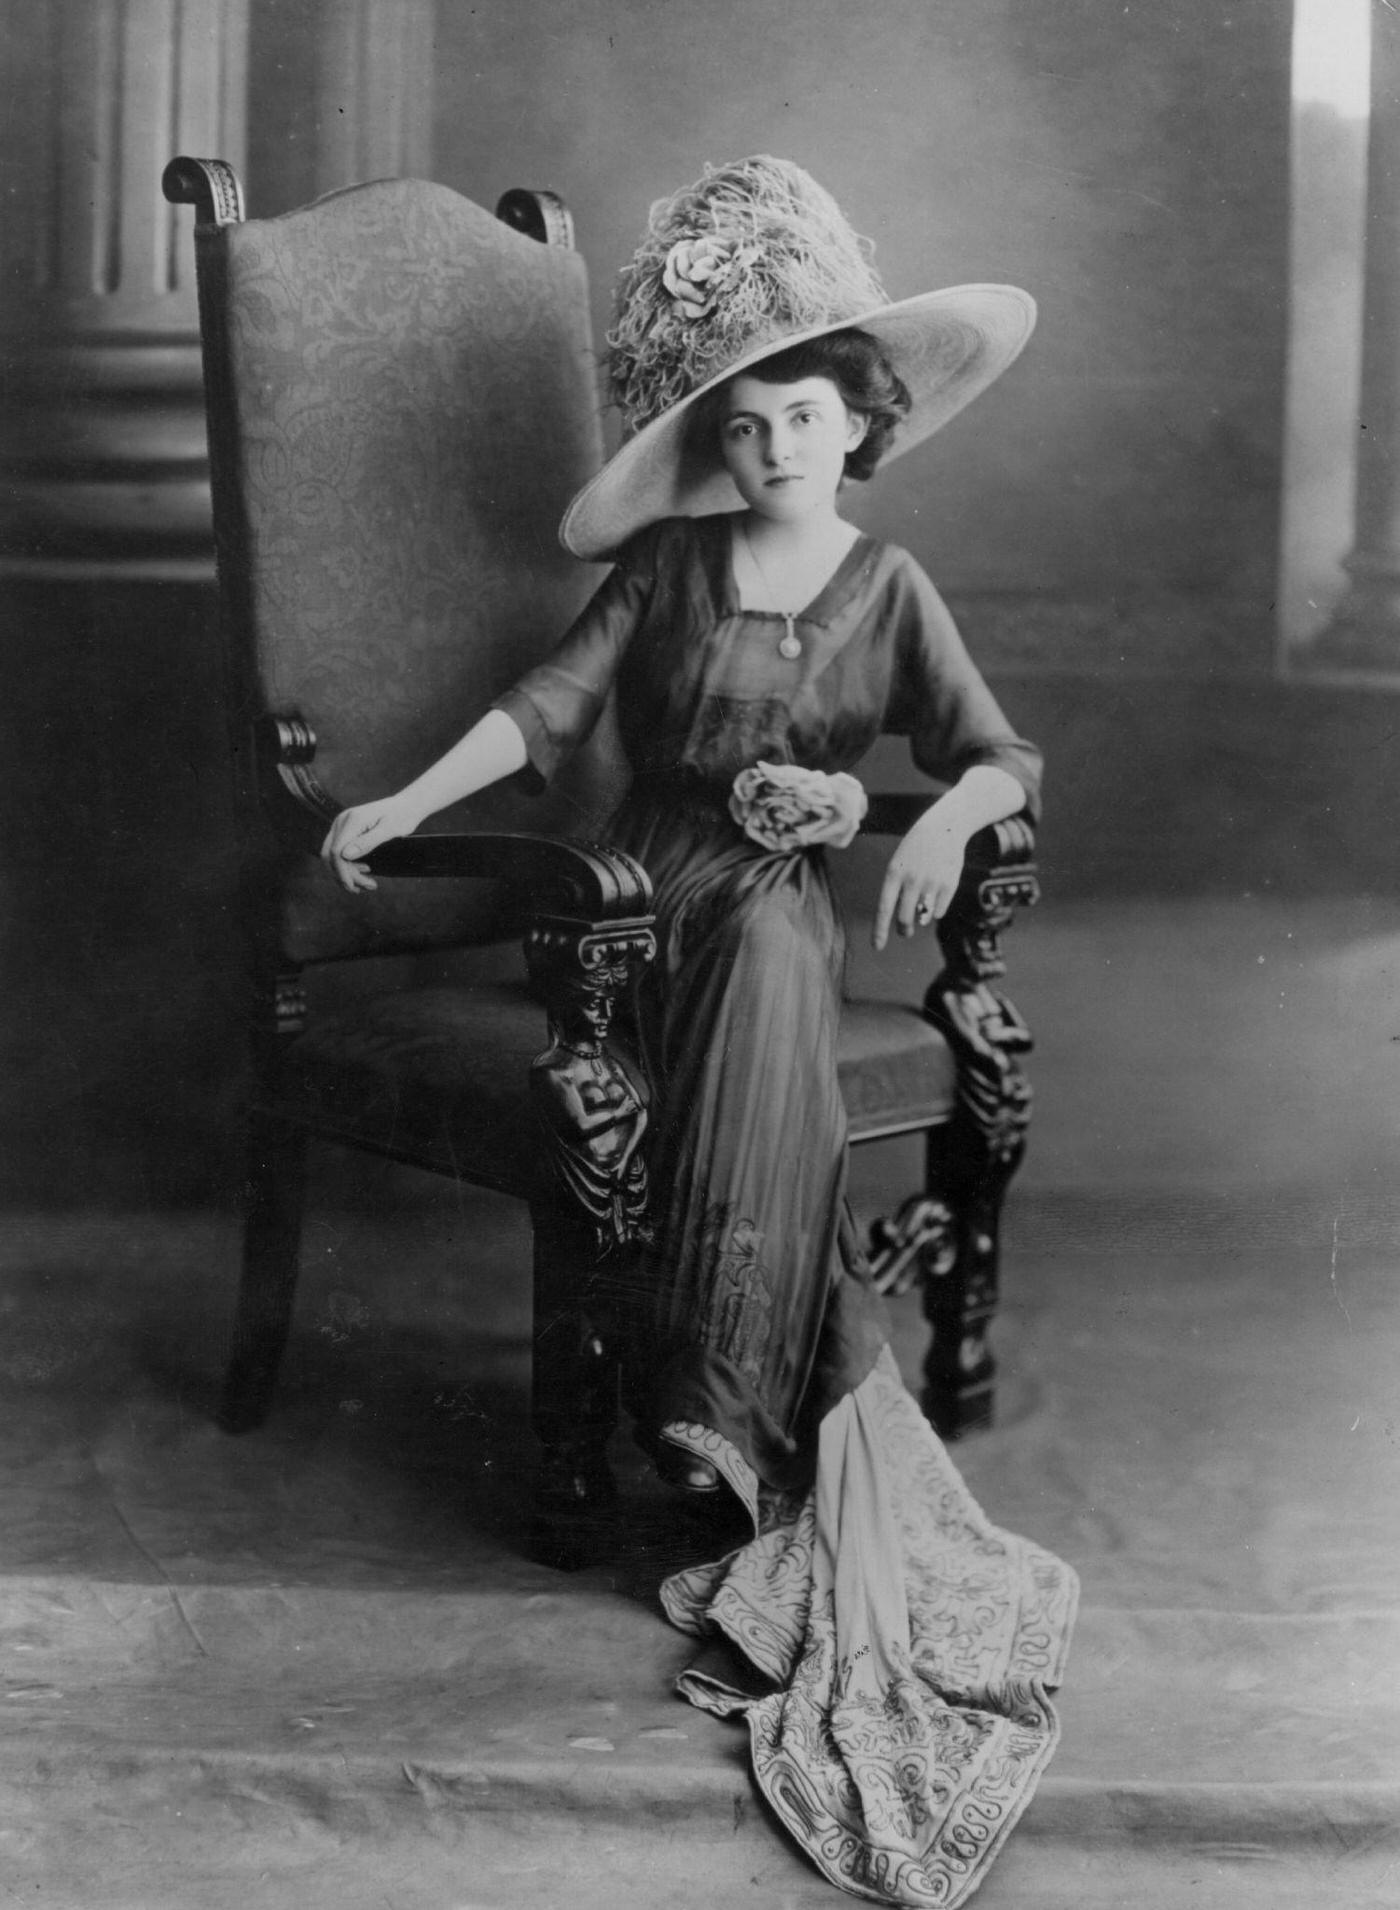 Lily Elsie, an English actress and singer, poses elegantly for the camera